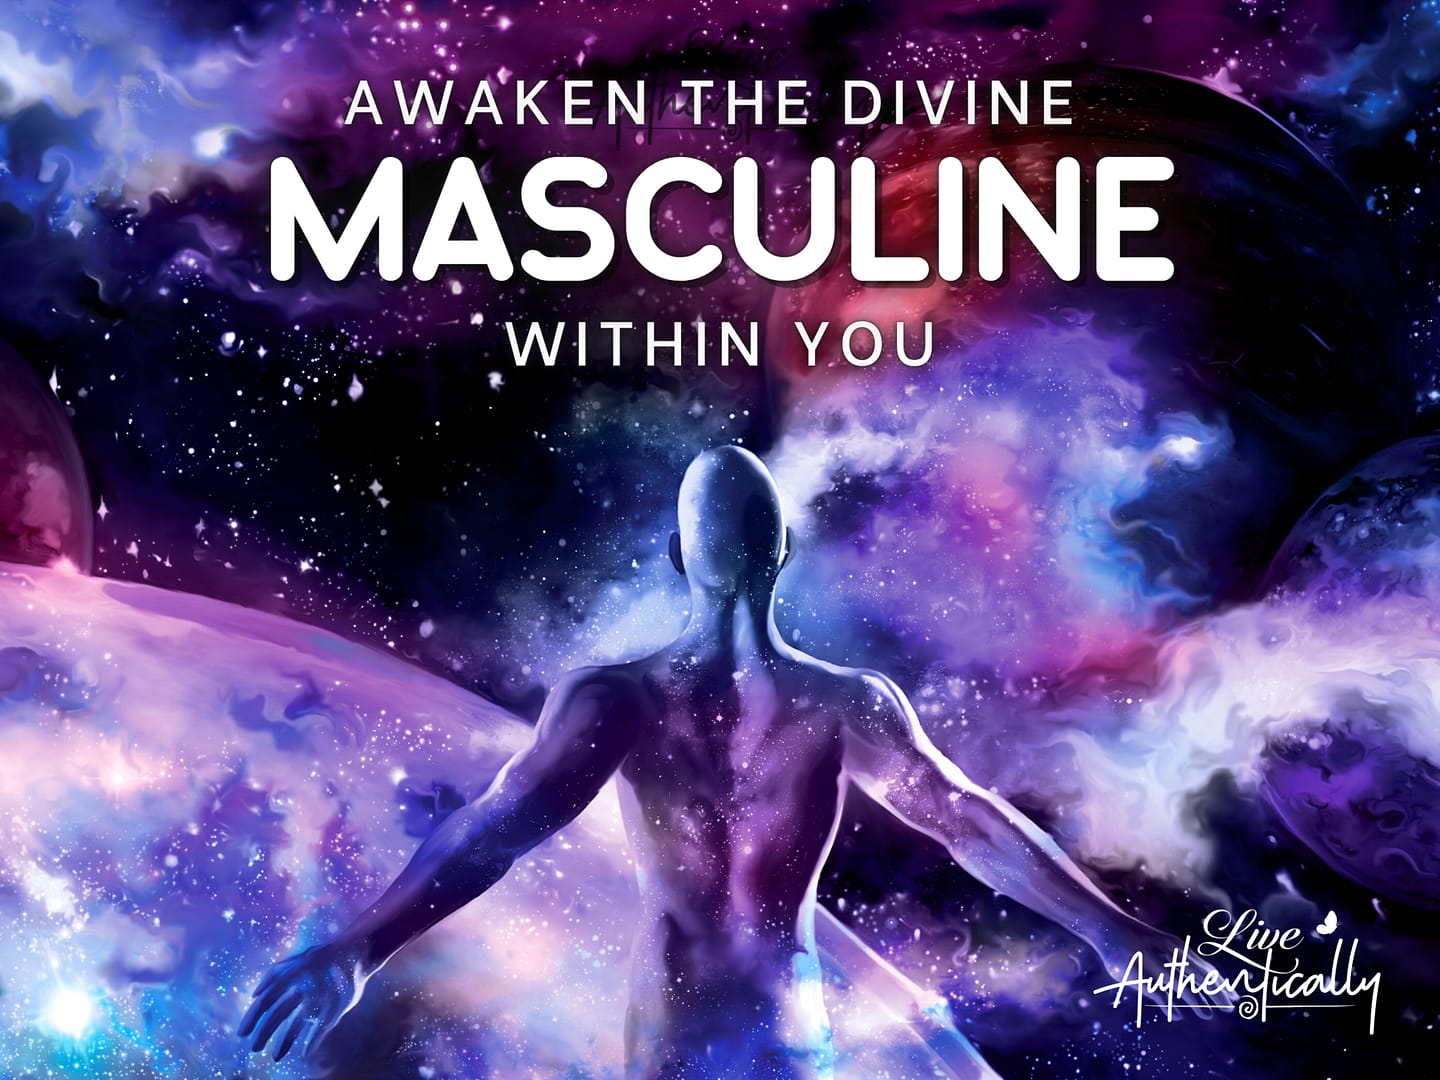 Awaken the Divine Masculine Within You